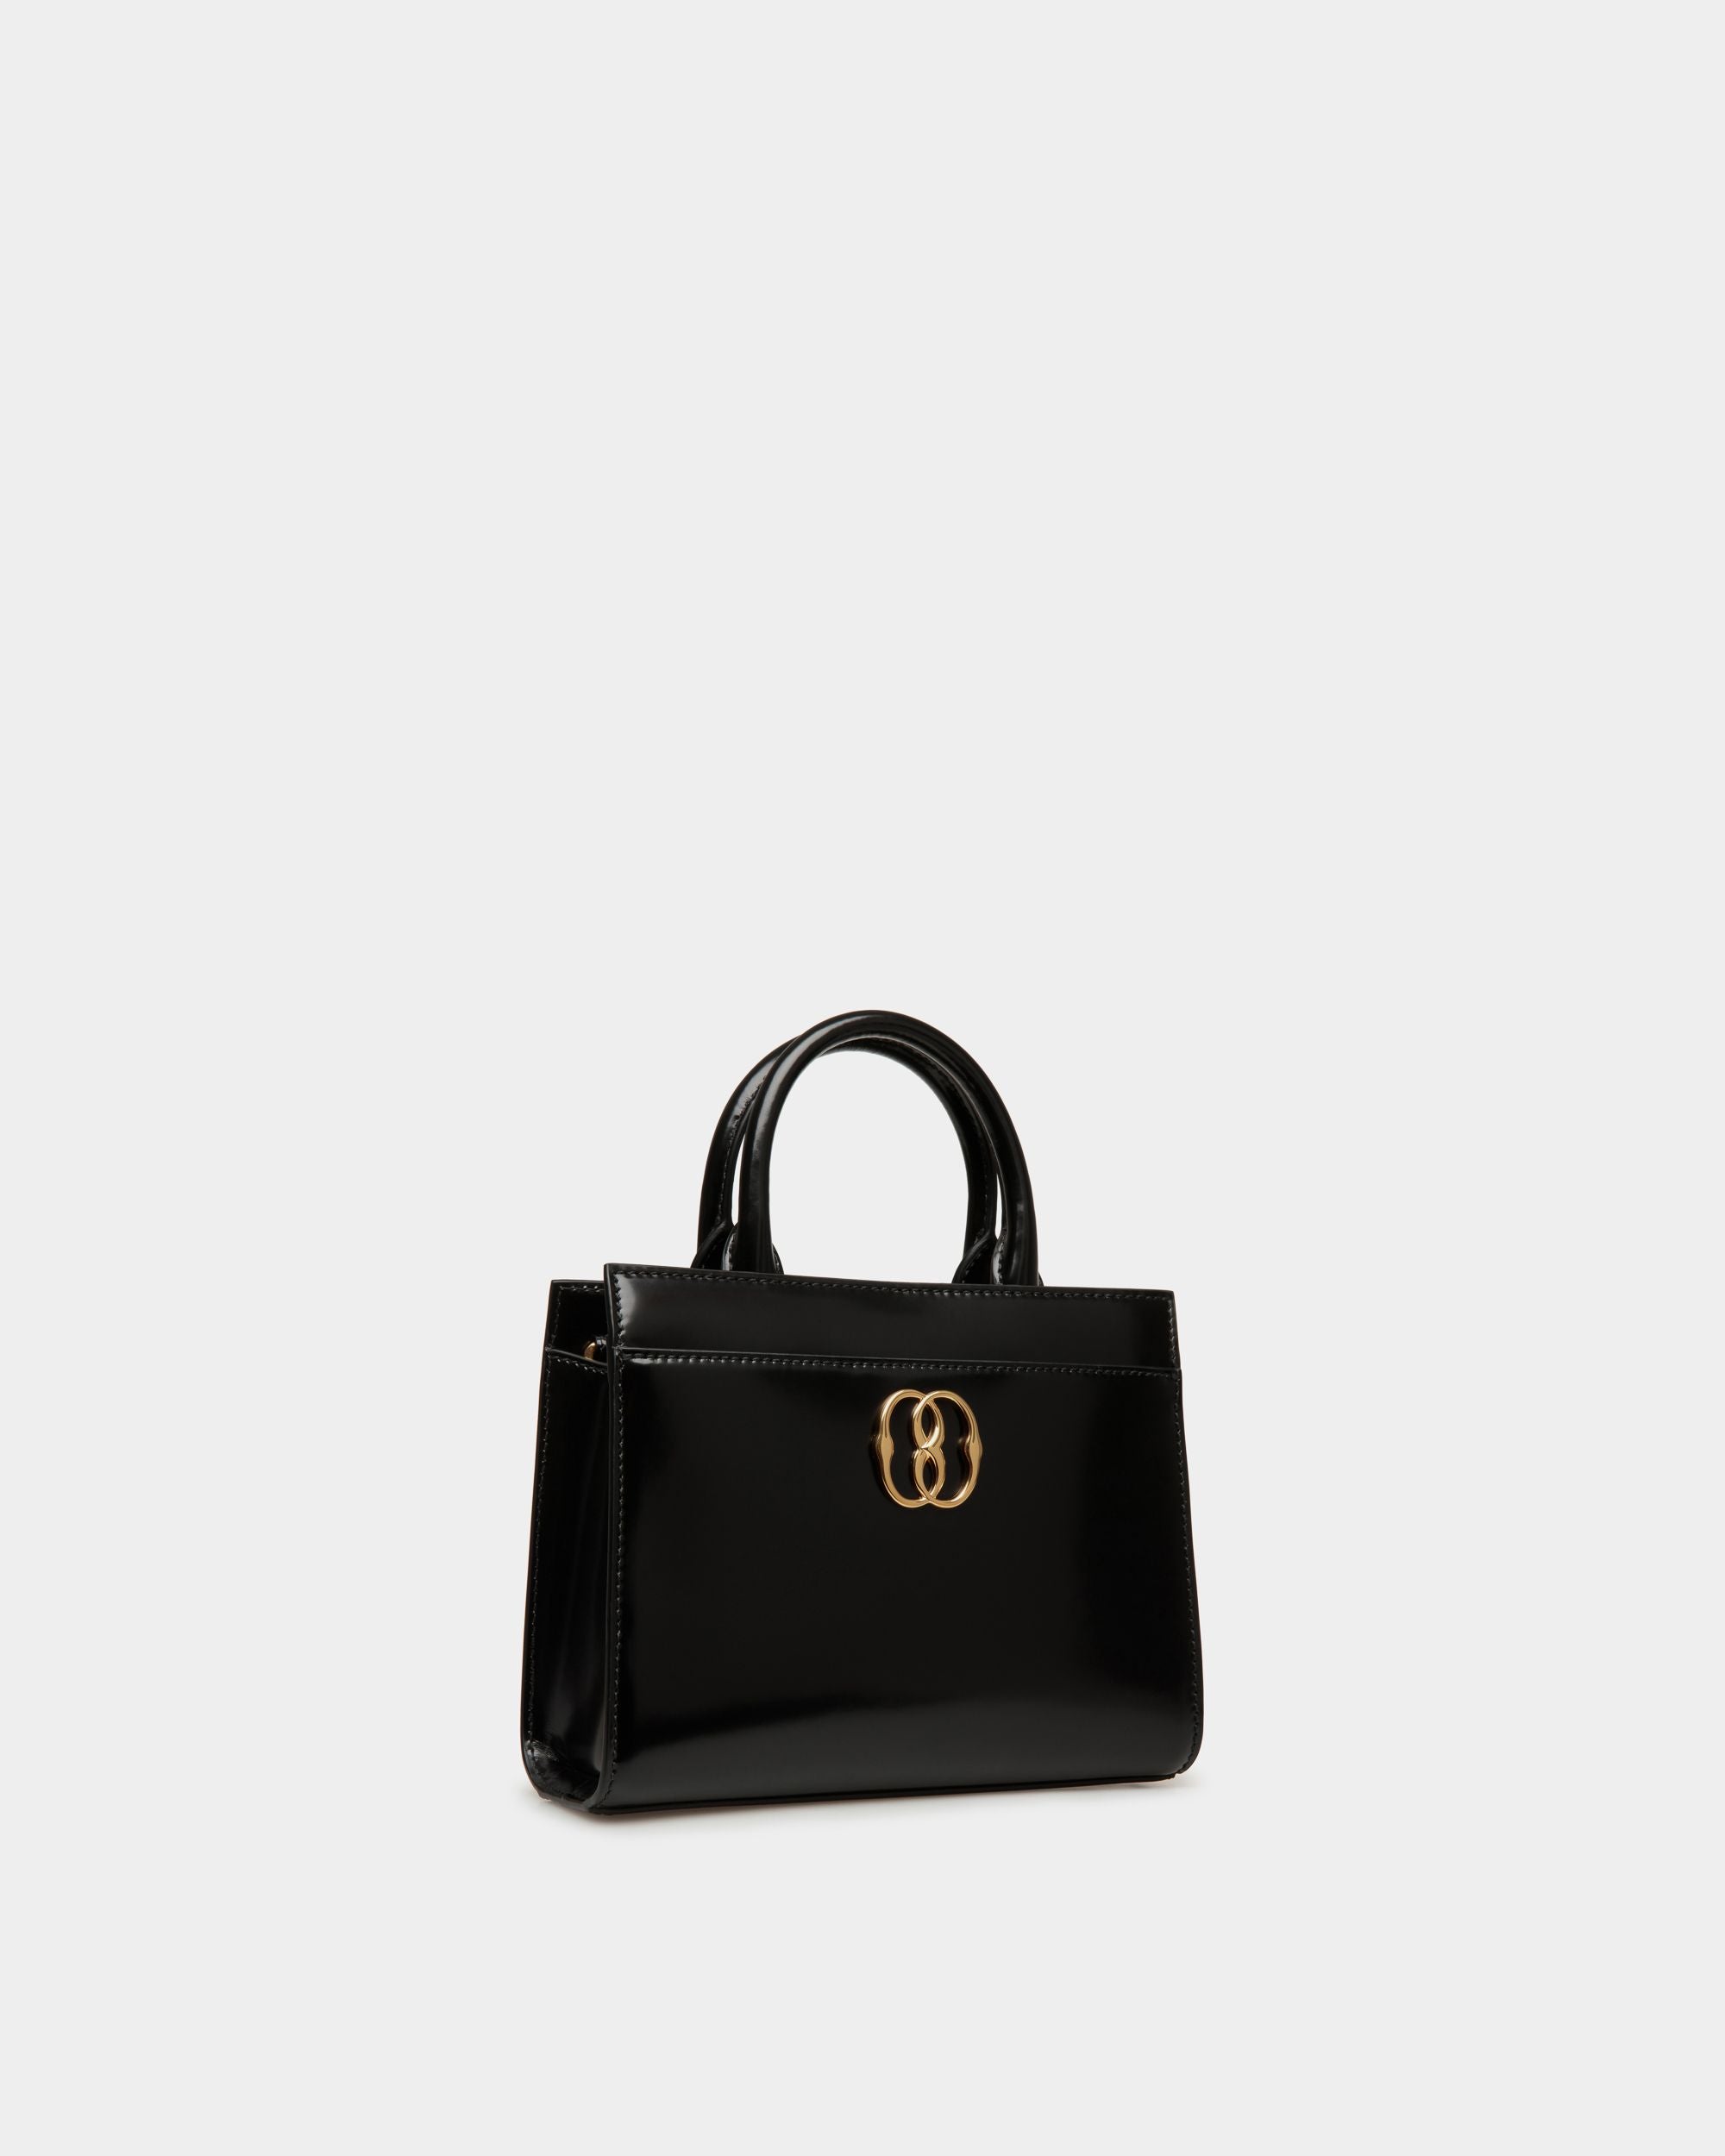 Emblem | Women's Small Tote Bag in Black Brushed Leather | Bally | Still Life 3/4 Front